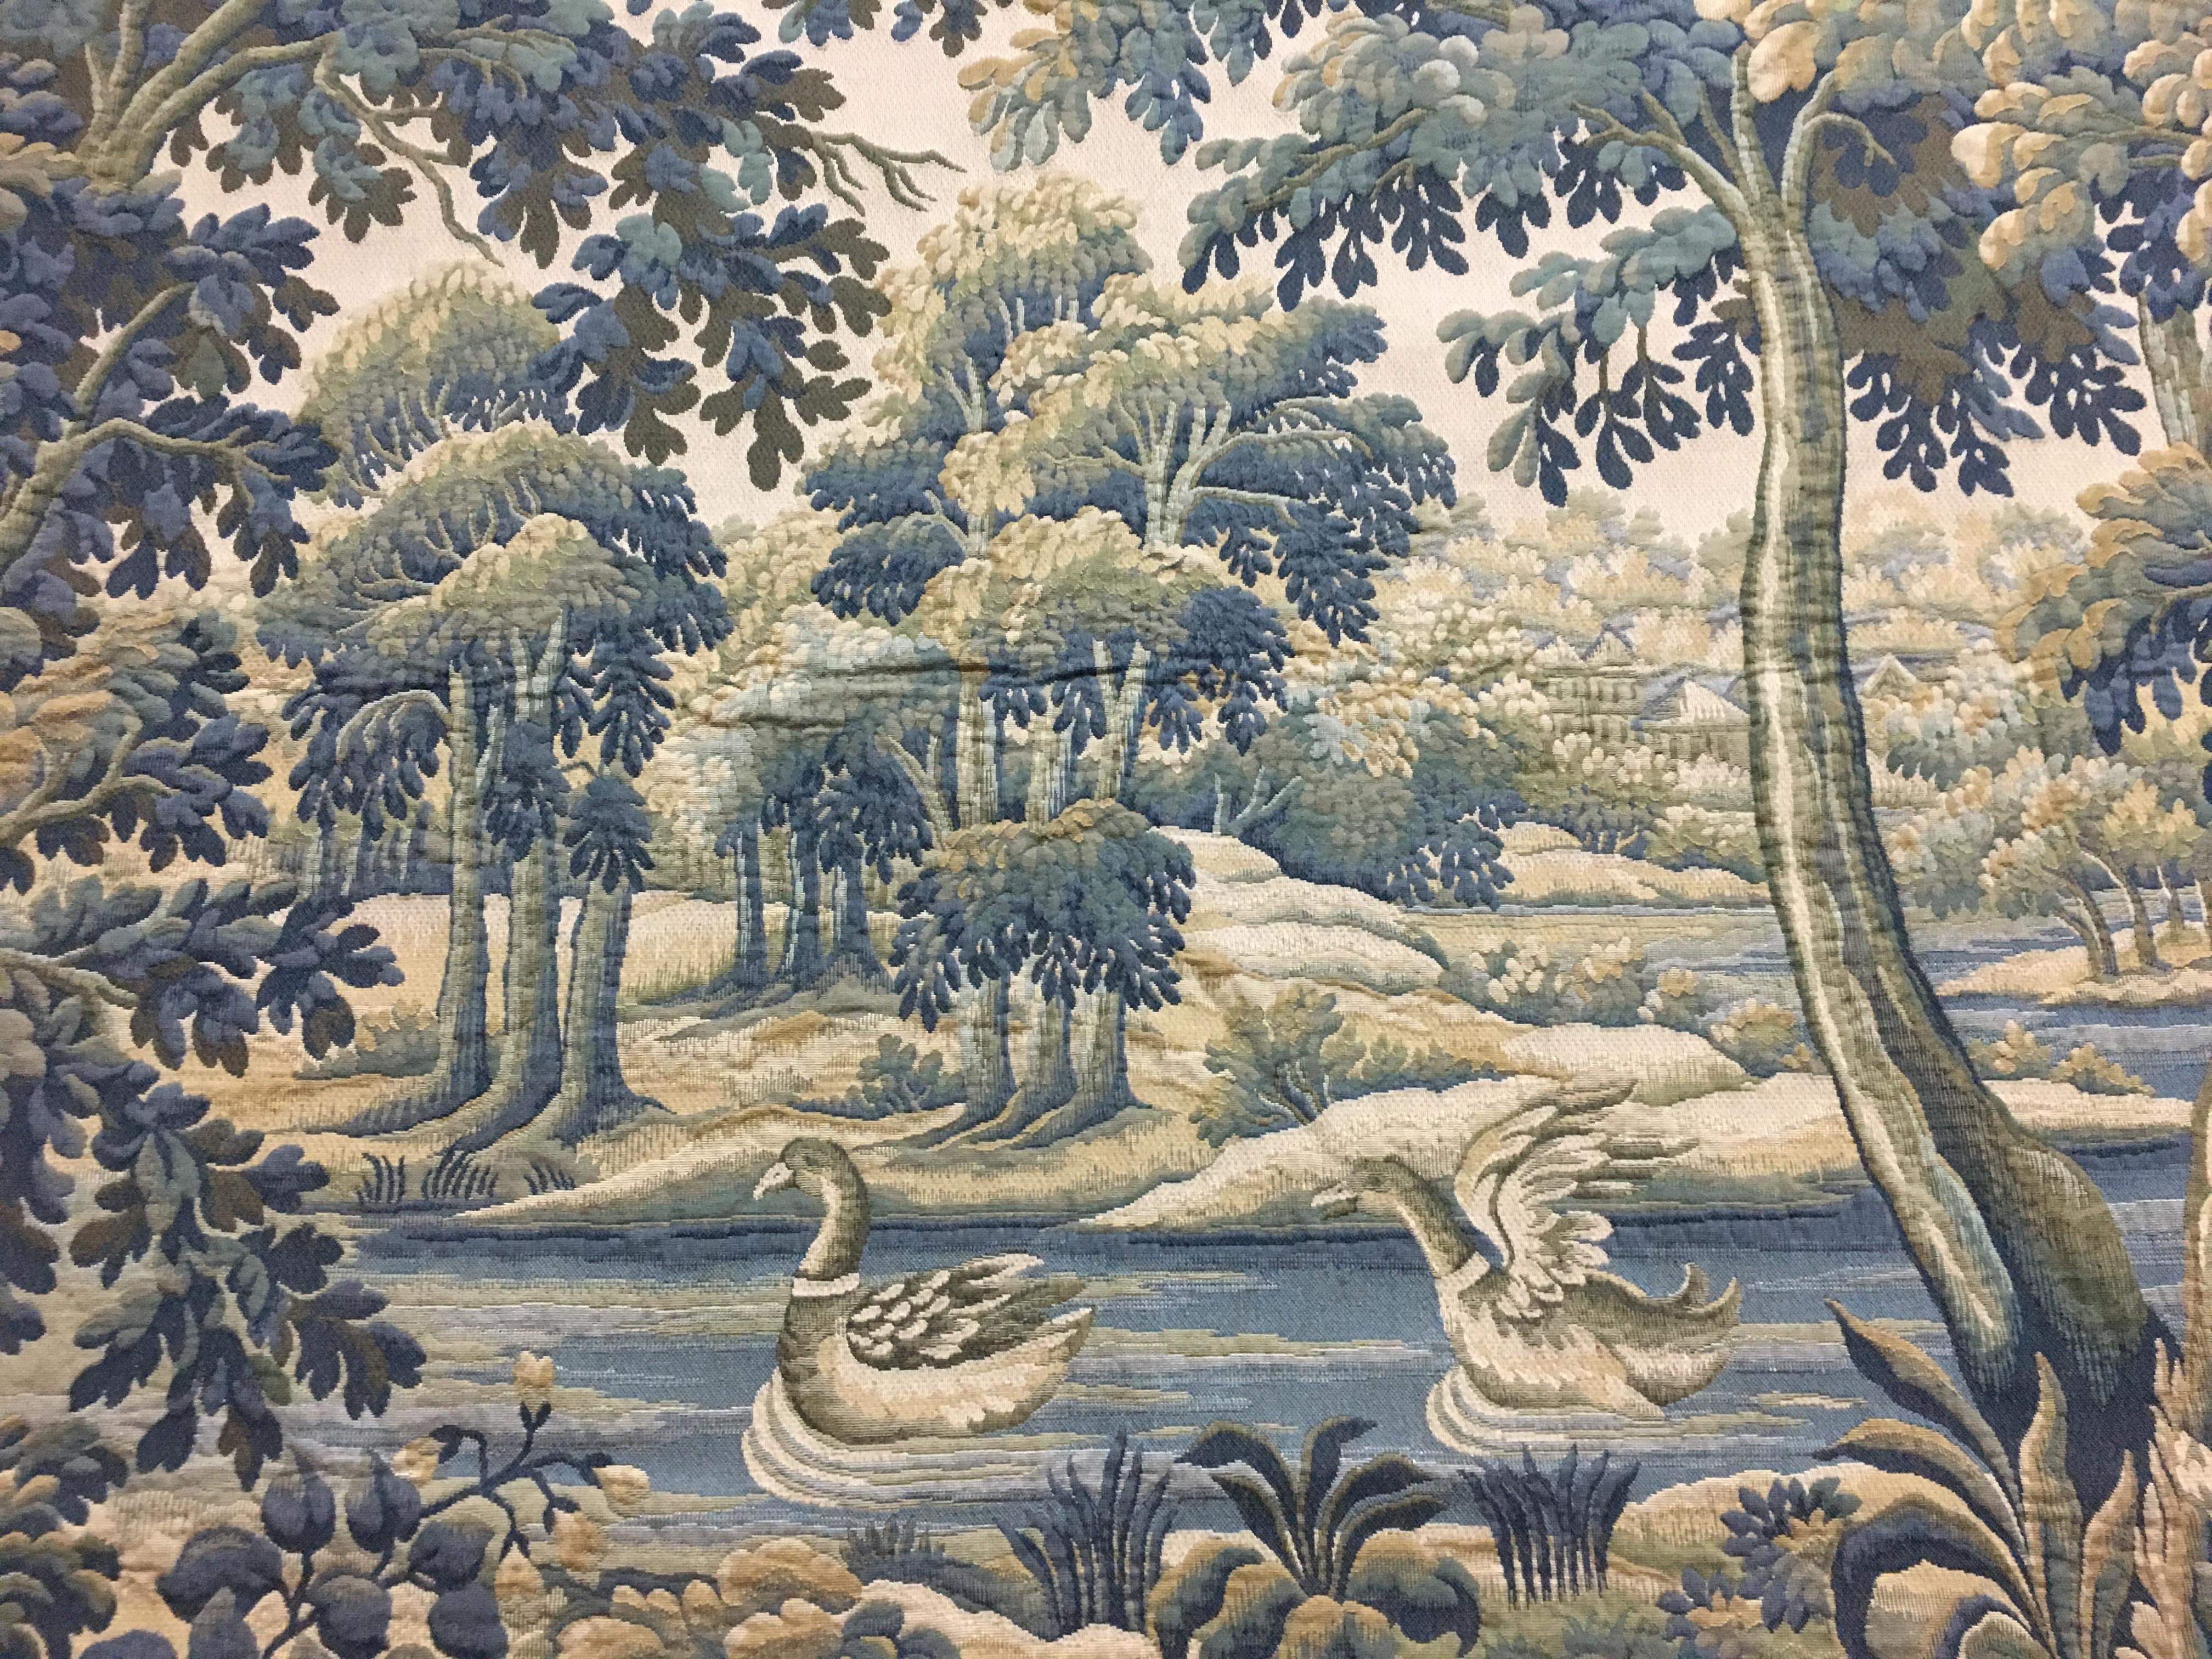 Hand-Crafted French Aubusson Style Verdure Tapestry with Rivers, Ducks, and Foliage